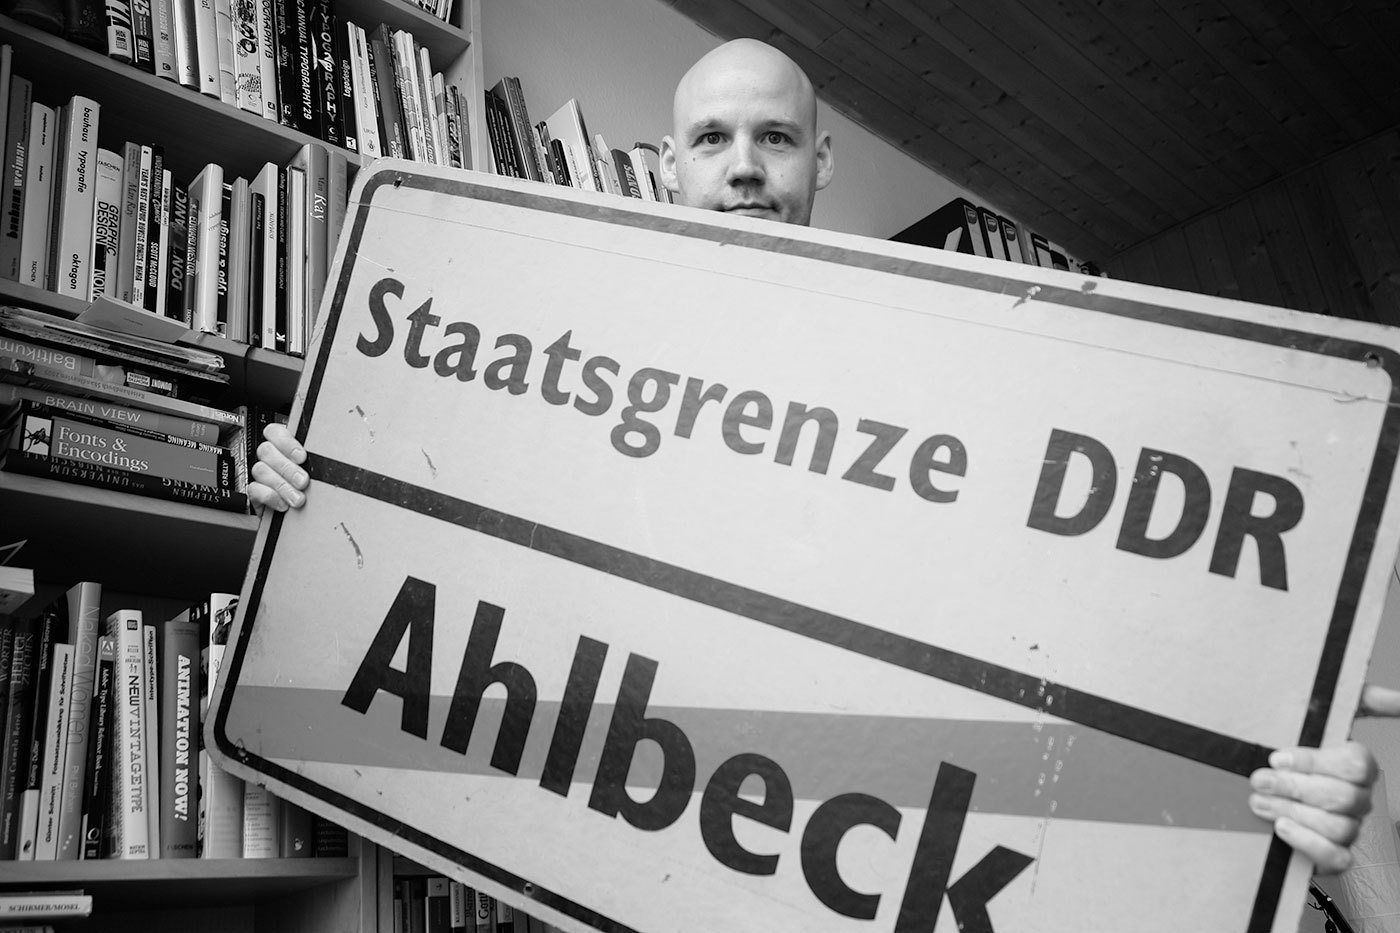 More information about "Traffic Sign Typefaces: East Germany"